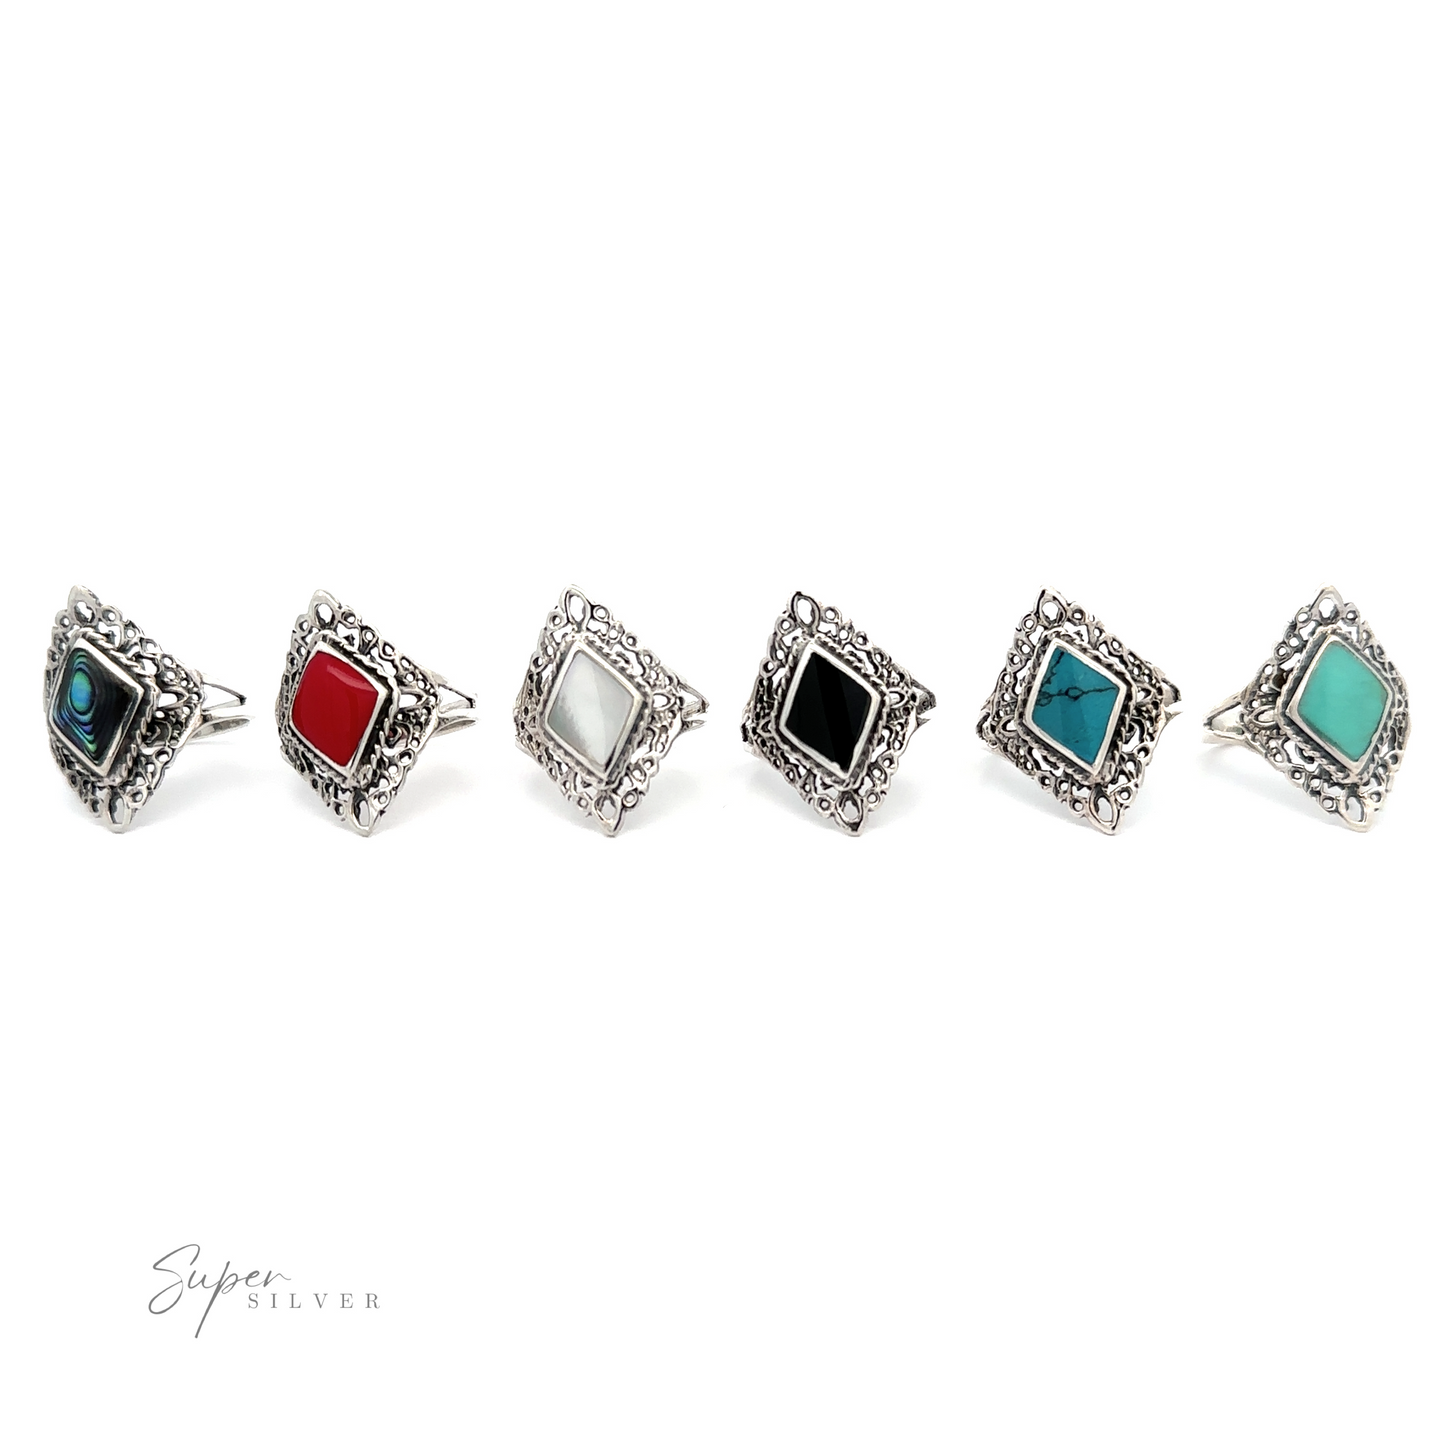 
                  
                    A row of Diamond Shaped Filigree Rings with Inlaid Stones in different colors.
                  
                